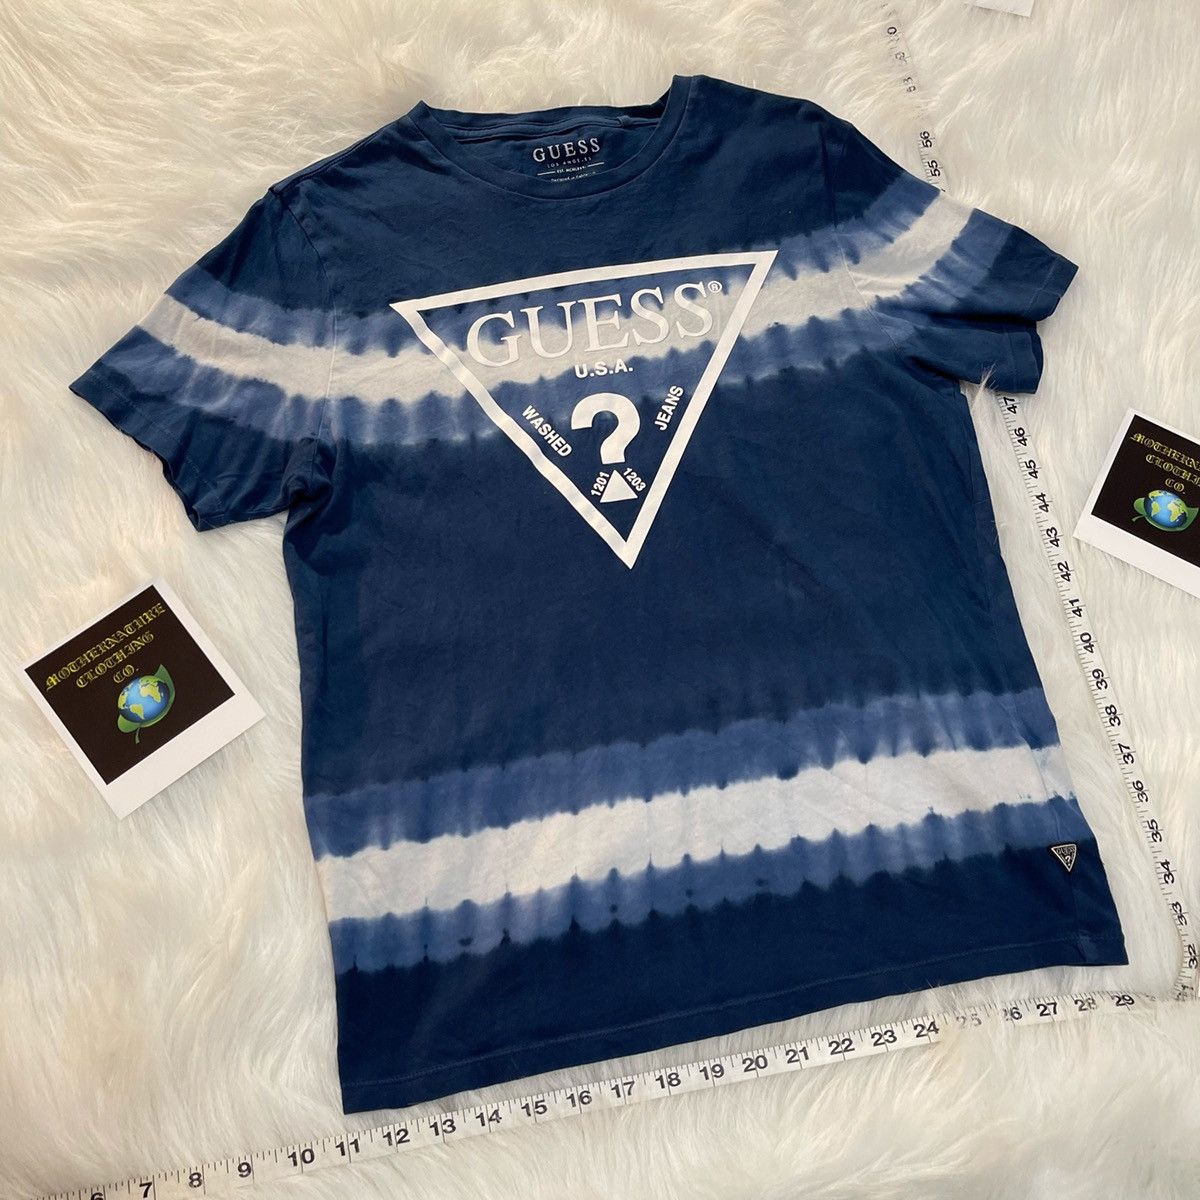 Guess HERITAGE GUESS “MIDNIGHT BLUE” TIE DYE LOGO TEE | Grailed